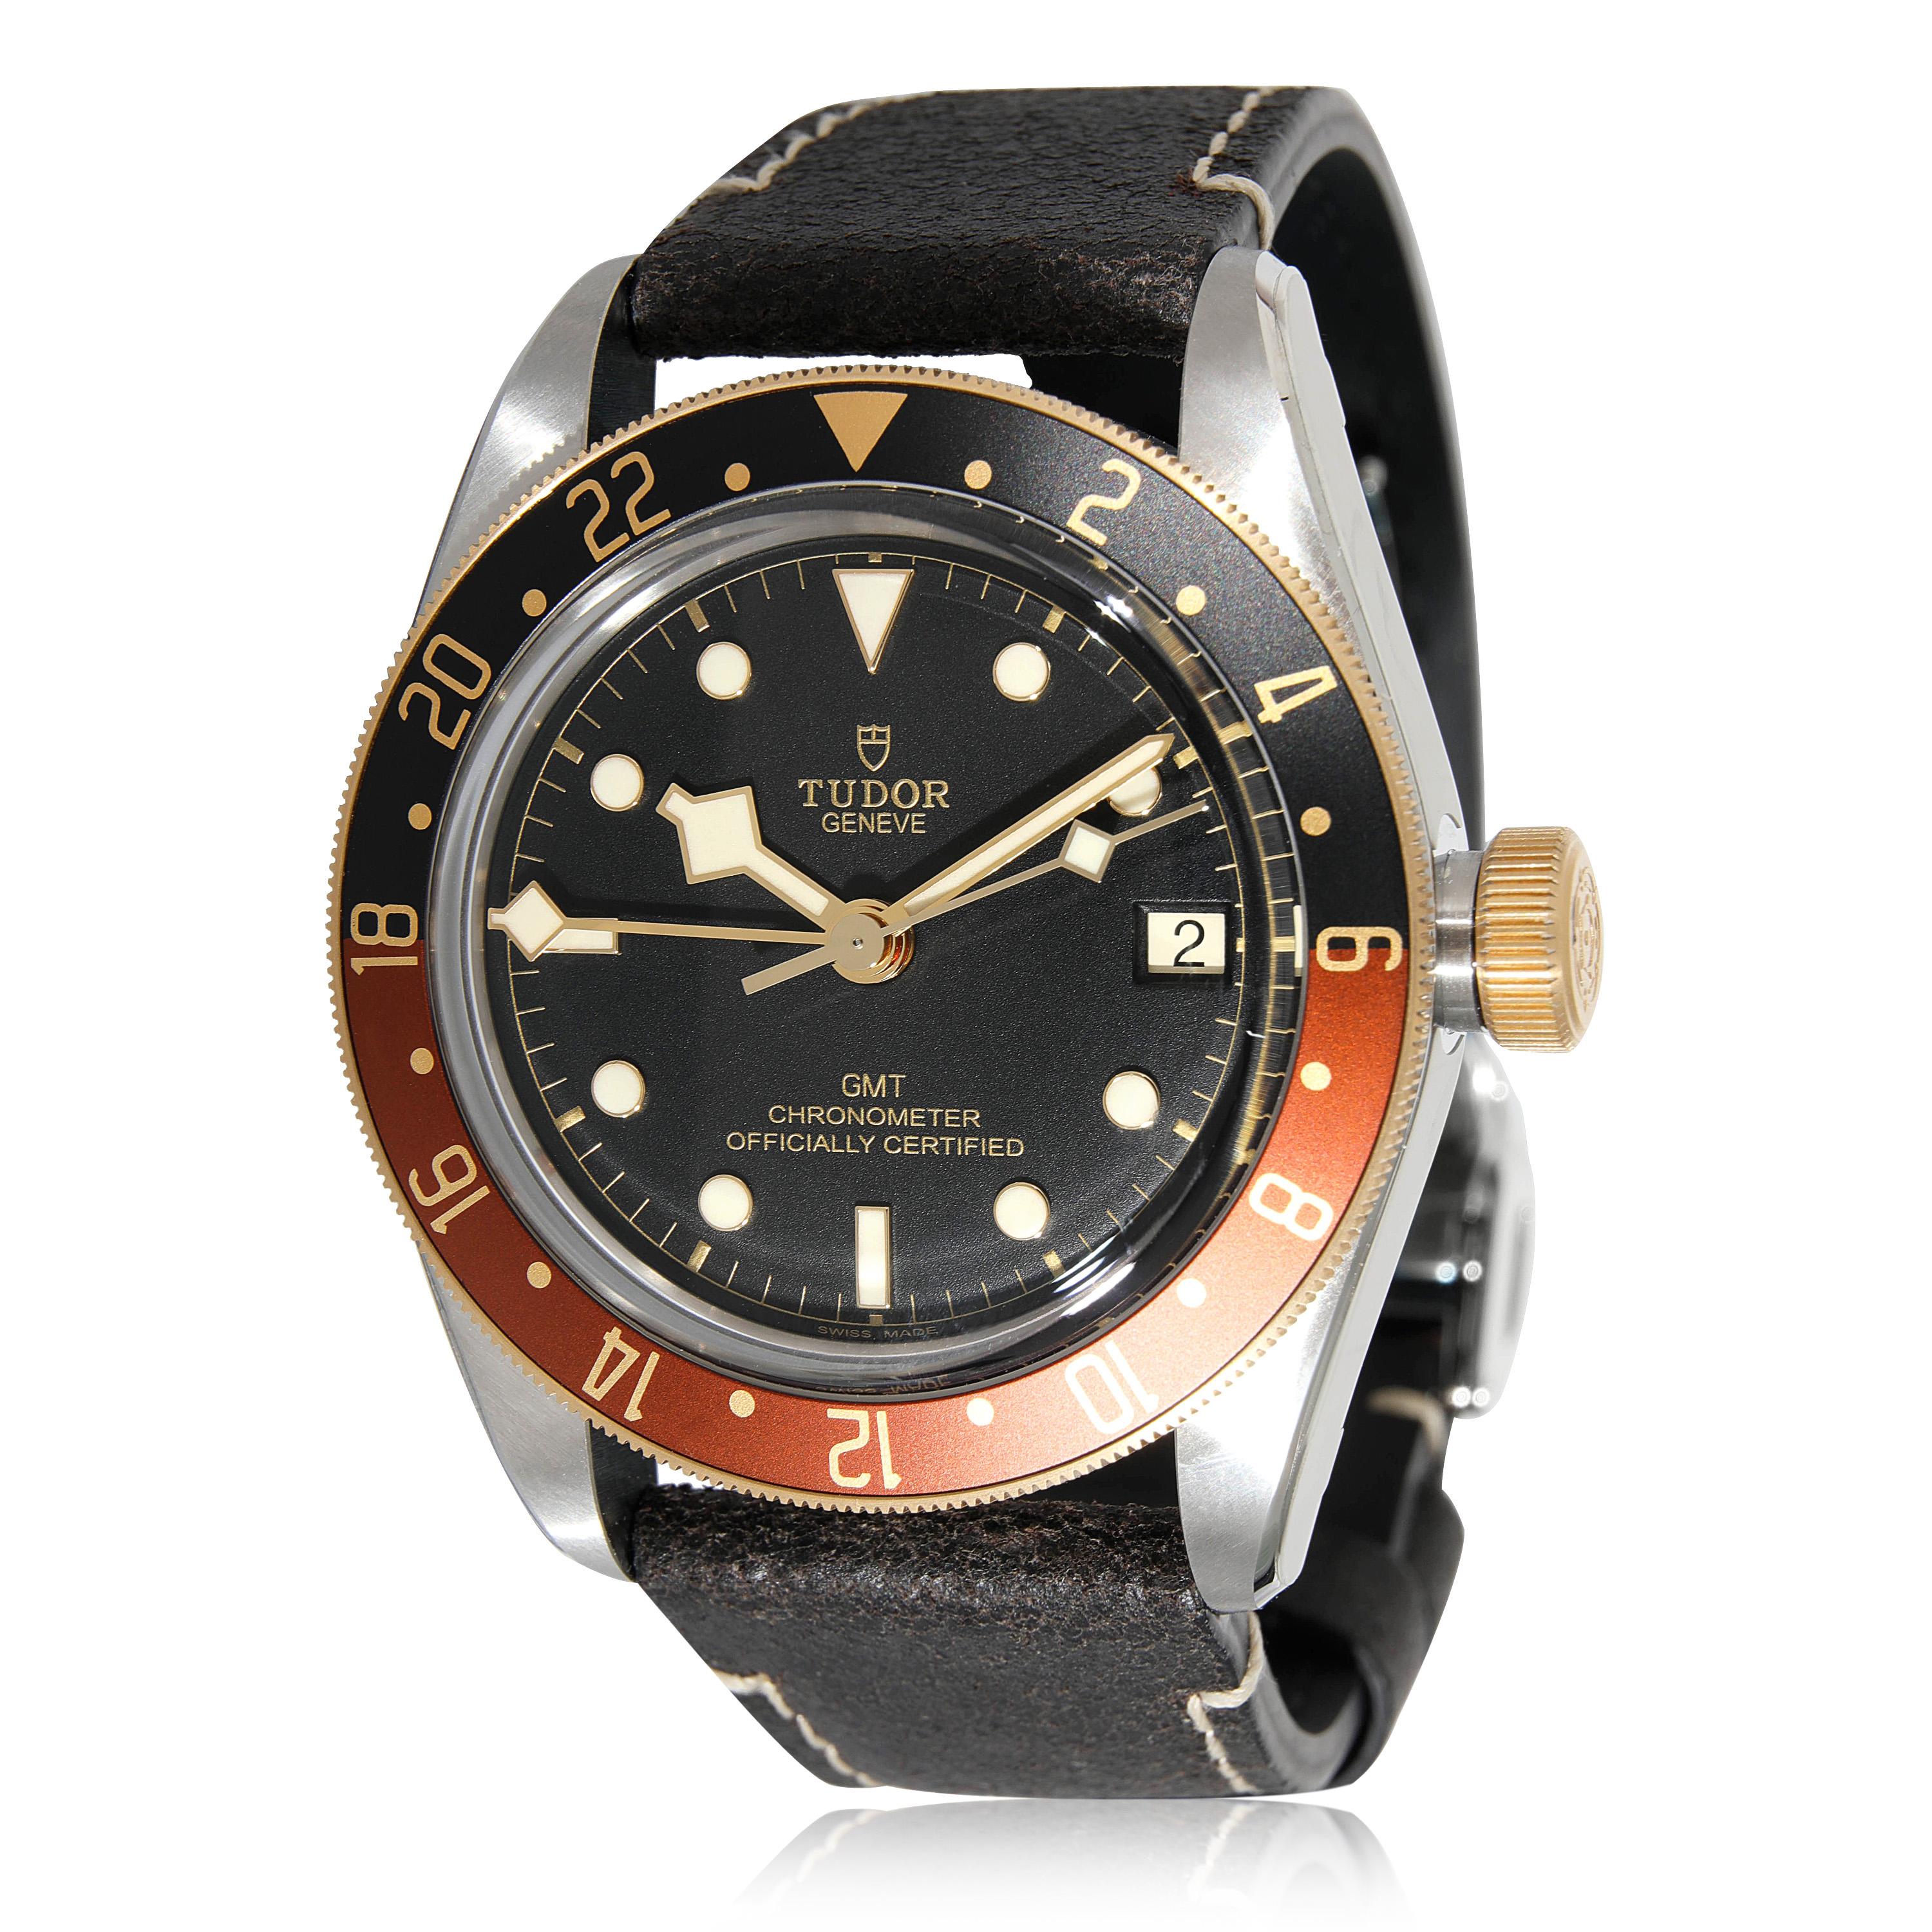 Tudor Black Bay GMT 79833MN Men's Watch in 18kt Stainless Steel/Yellow Gold

SKU: 131442

PRIMARY DETAILS
Brand: Tudor
Model: Black Bay GMT
Country of Origin: Switzerland
Movement Type: Mechanical: Automatic/Kinetic
Year Manufactured: 2023
Year of